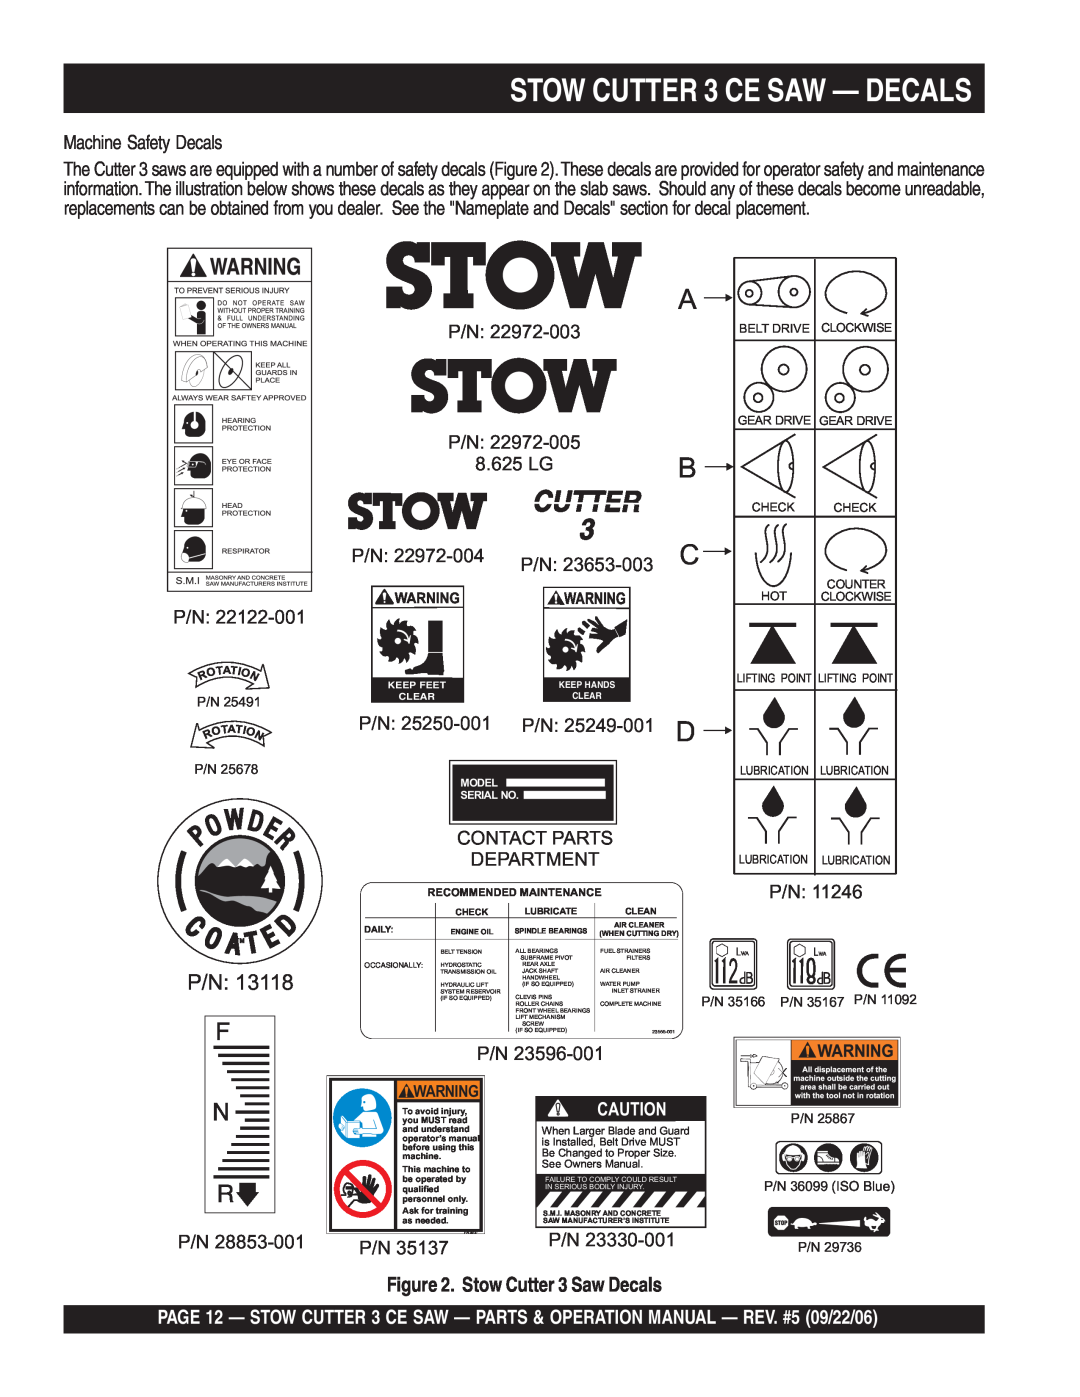 Stow 20HP STOW CUTTER 3 CE SAW - DECALS, Stow Cutter 3 Saw Decals, 8.625 LG, P/N 25249-001 D, Contact Parts Department 